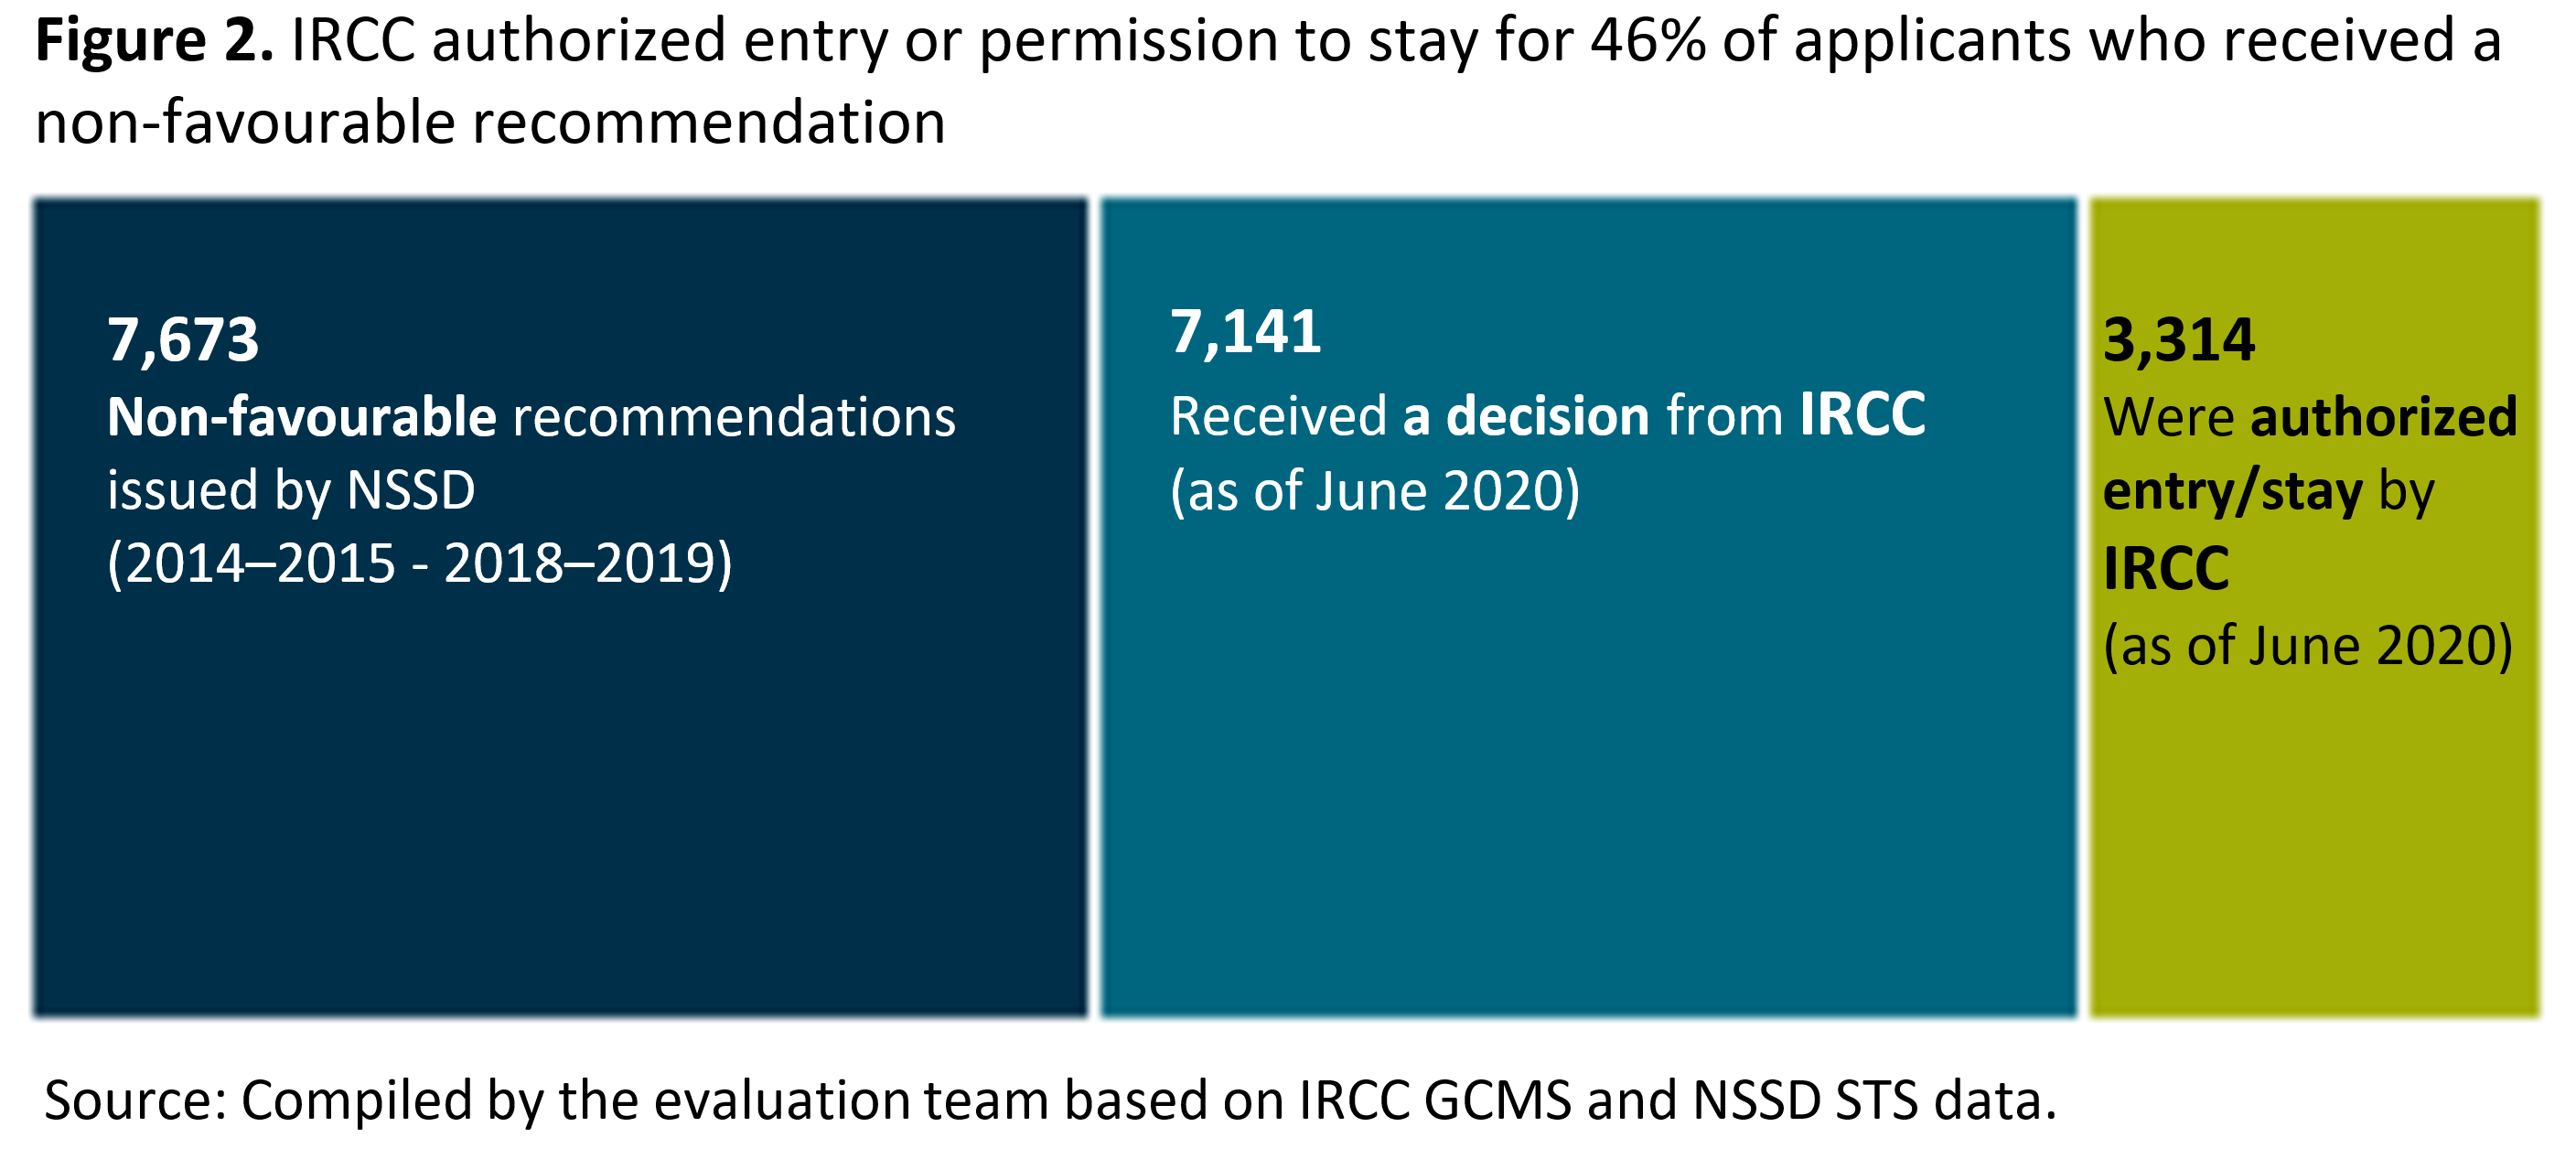 Figure 2 shows that <abbr>IRCC</abbr> authorized entry or permission to stay for 46% of applicants who received a non-favourable recommendation.